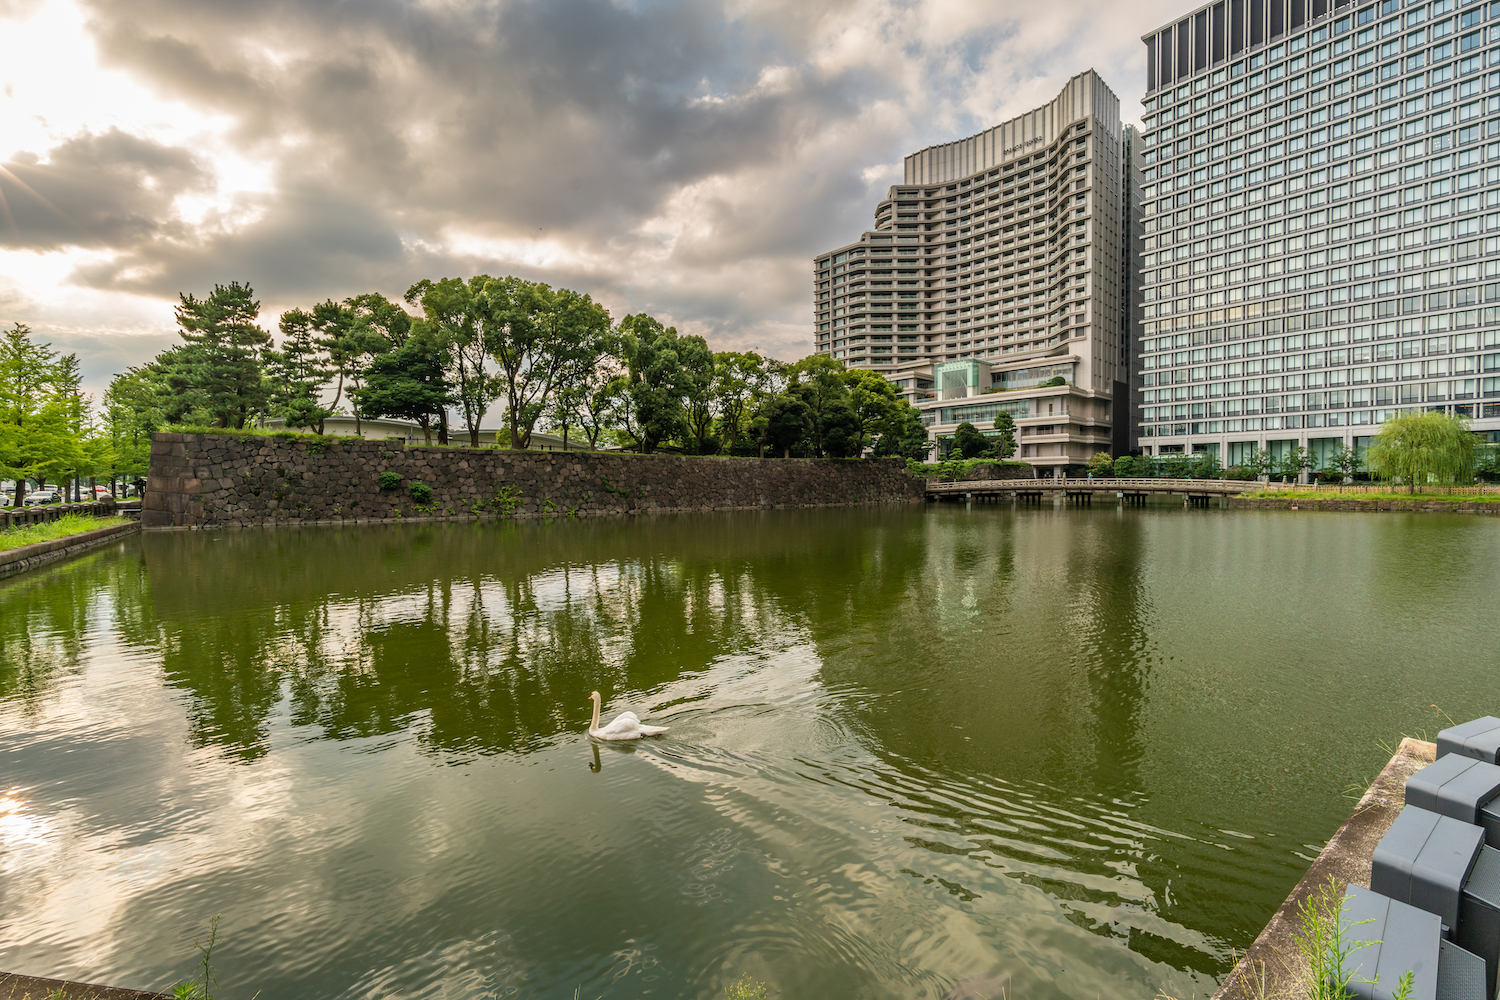 Tokyo, Japan - August 22, 2019: Wide angle view of Beautiful Swan, Bridge, and buildings water reflections at Tokyo imperial palace. Palace Hotel in the Background